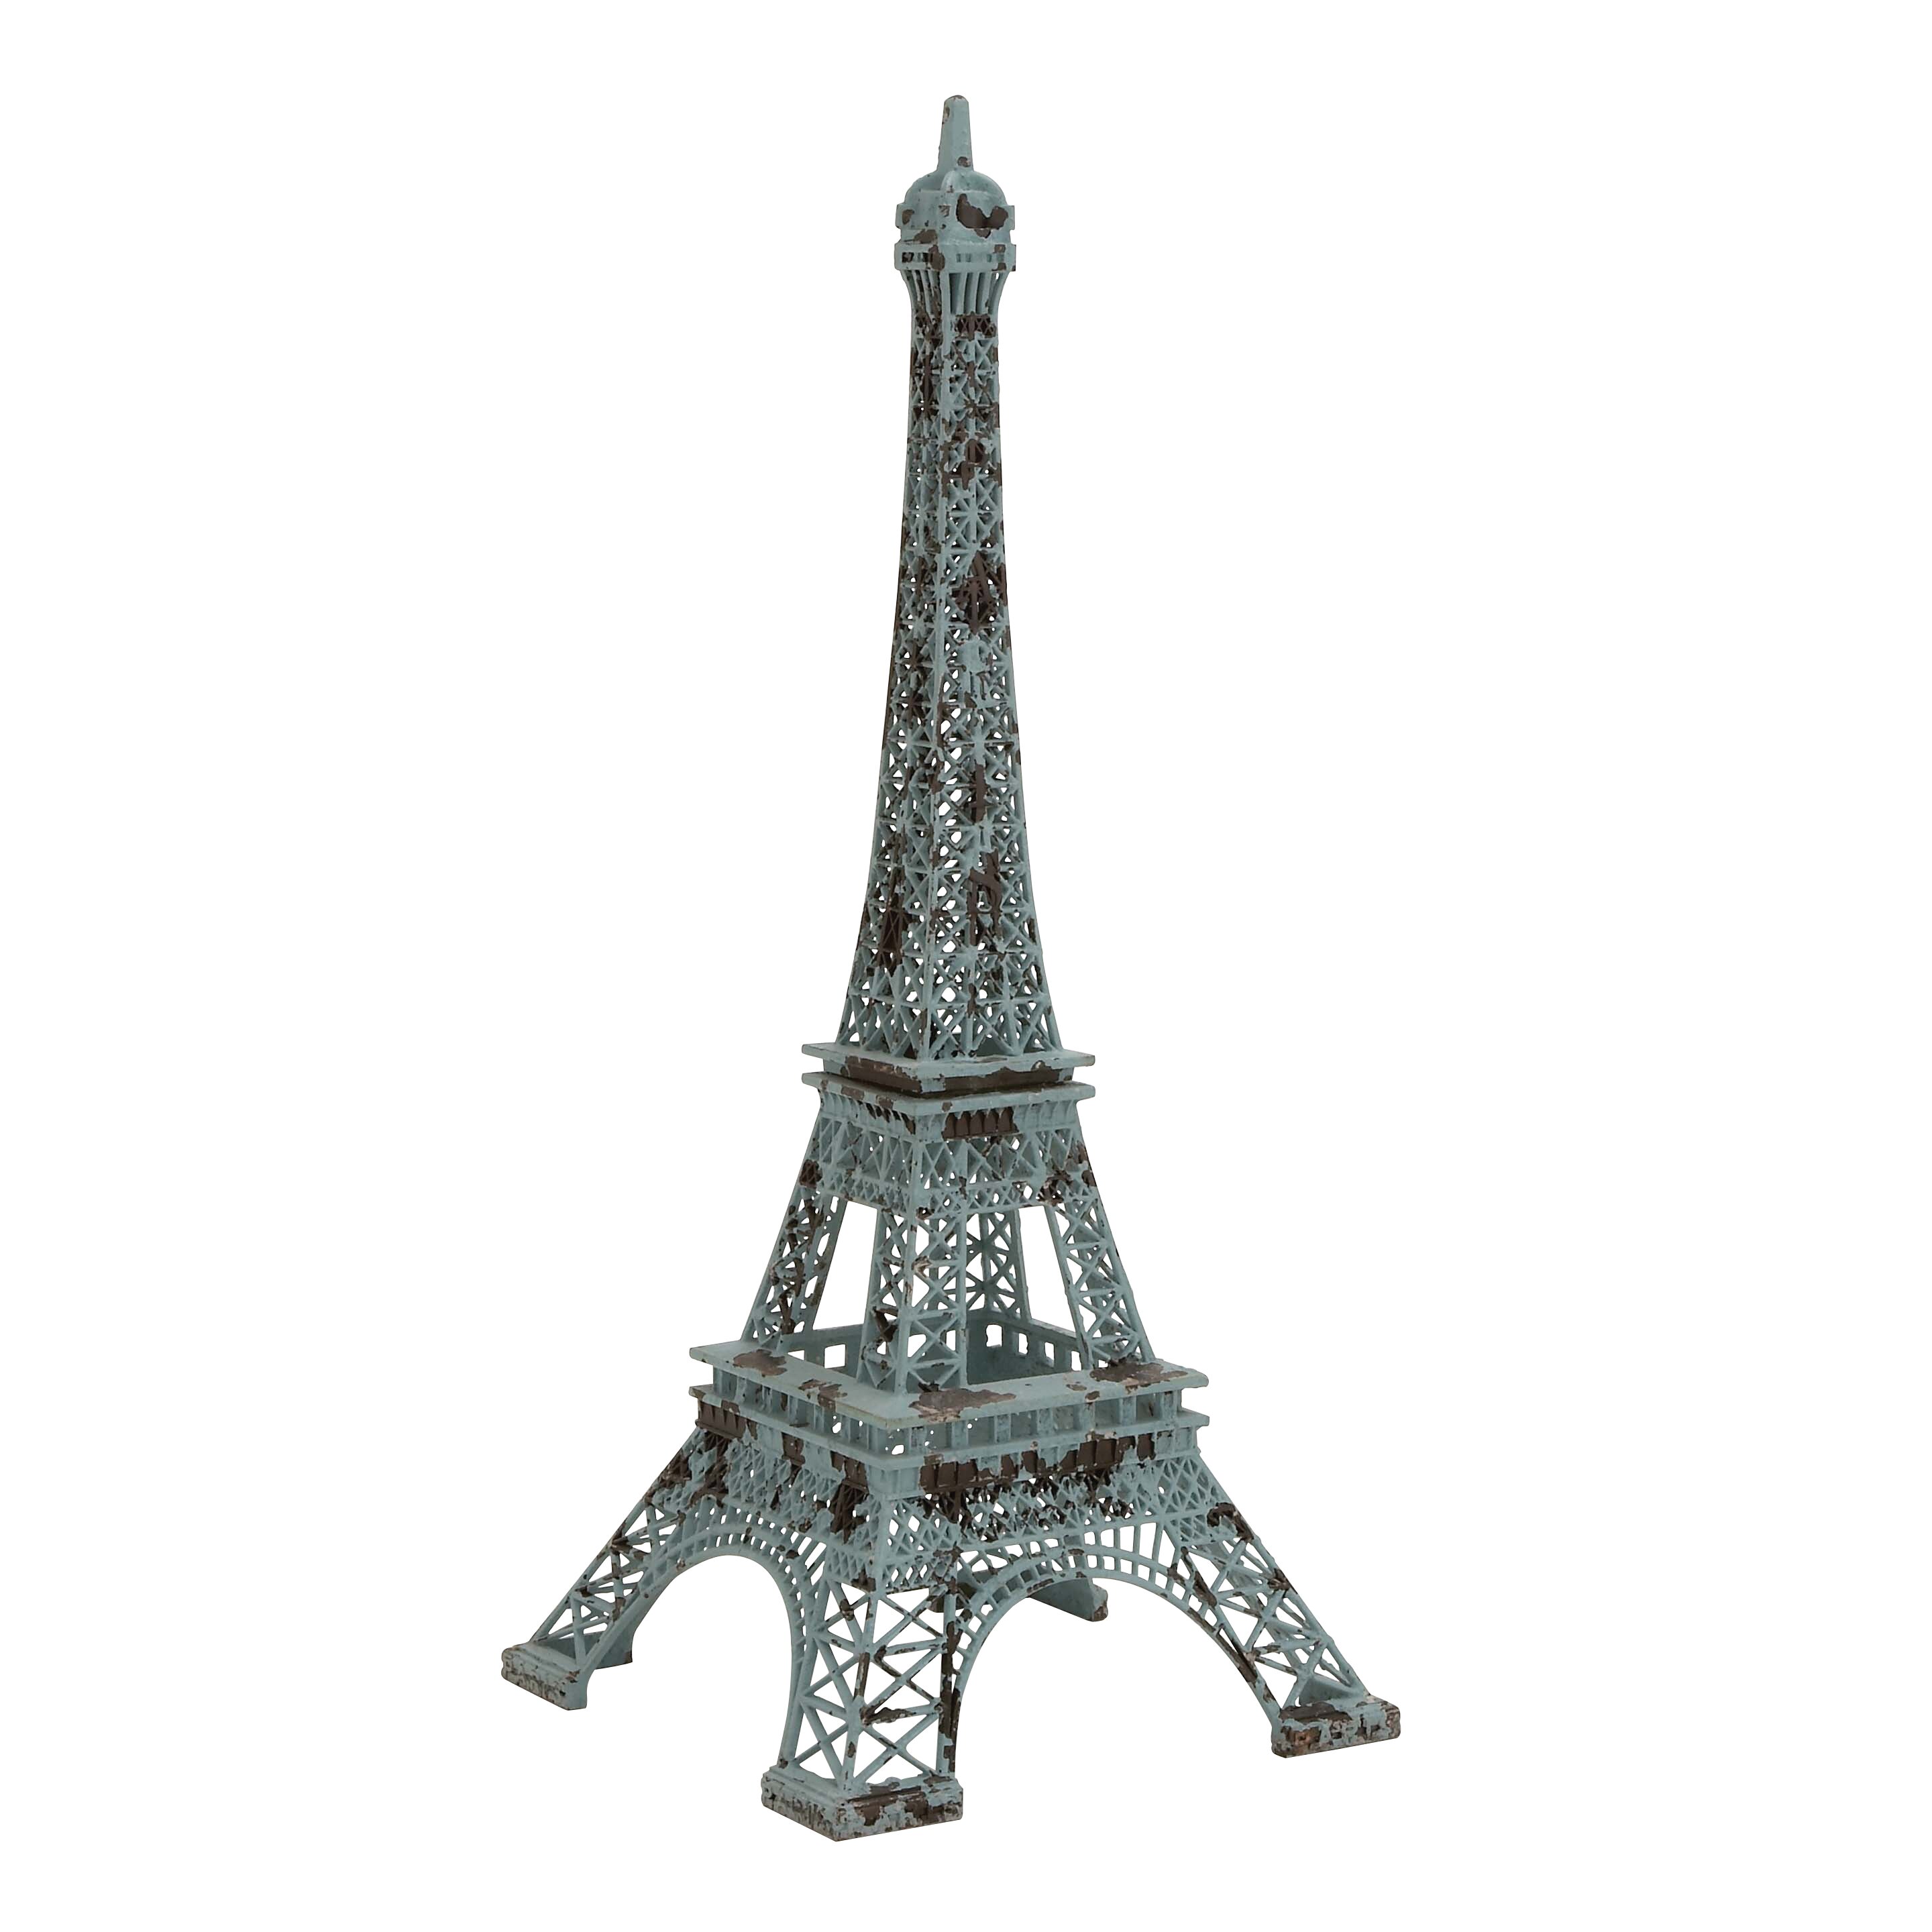 Woodland Imports The Charming Metal Decorative Eiffel Tower Sculpture ...